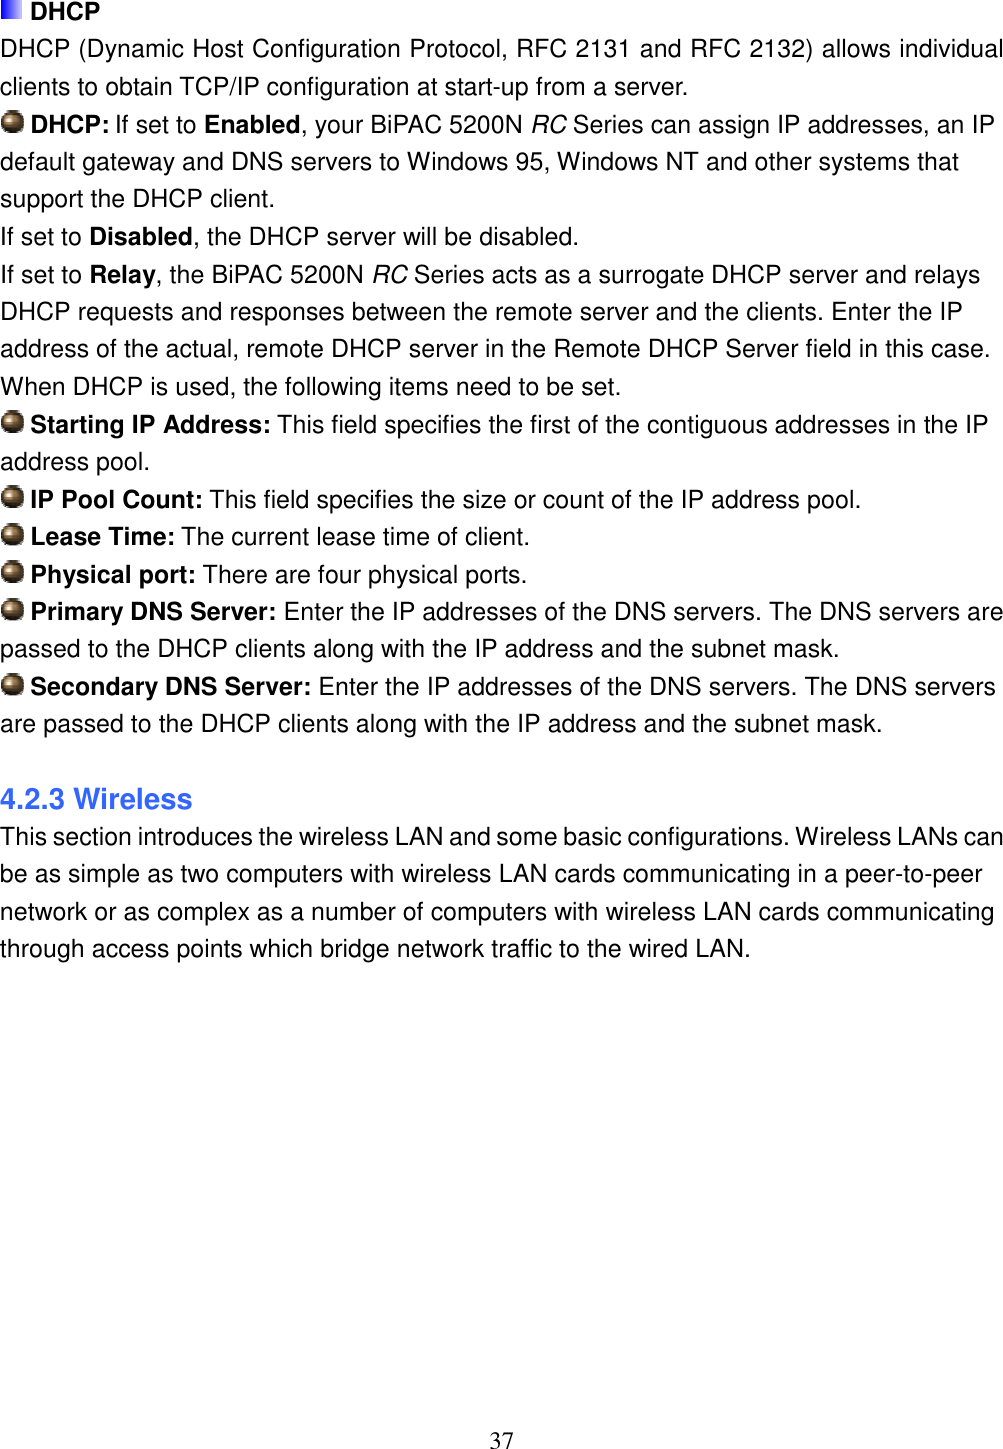 37   DHCP DHCP (Dynamic Host Configuration Protocol, RFC 2131 and RFC 2132) allows individual clients to obtain TCP/IP configuration at start-up from a server.  DHCP: If set to Enabled, your BiPAC 5200N RC Series can assign IP addresses, an IP default gateway and DNS servers to Windows 95, Windows NT and other systems that support the DHCP client. If set to Disabled, the DHCP server will be disabled. If set to Relay, the BiPAC 5200N RC Series acts as a surrogate DHCP server and relays DHCP requests and responses between the remote server and the clients. Enter the IP address of the actual, remote DHCP server in the Remote DHCP Server field in this case. When DHCP is used, the following items need to be set.  Starting IP Address: This field specifies the first of the contiguous addresses in the IP address pool.  IP Pool Count: This field specifies the size or count of the IP address pool.  Lease Time: The current lease time of client.  Physical port: There are four physical ports.  Primary DNS Server: Enter the IP addresses of the DNS servers. The DNS servers are passed to the DHCP clients along with the IP address and the subnet mask.  Secondary DNS Server: Enter the IP addresses of the DNS servers. The DNS servers are passed to the DHCP clients along with the IP address and the subnet mask.  4.2.3 Wireless This section introduces the wireless LAN and some basic configurations. Wireless LANs can be as simple as two computers with wireless LAN cards communicating in a peer-to-peer network or as complex as a number of computers with wireless LAN cards communicating through access points which bridge network traffic to the wired LAN. 